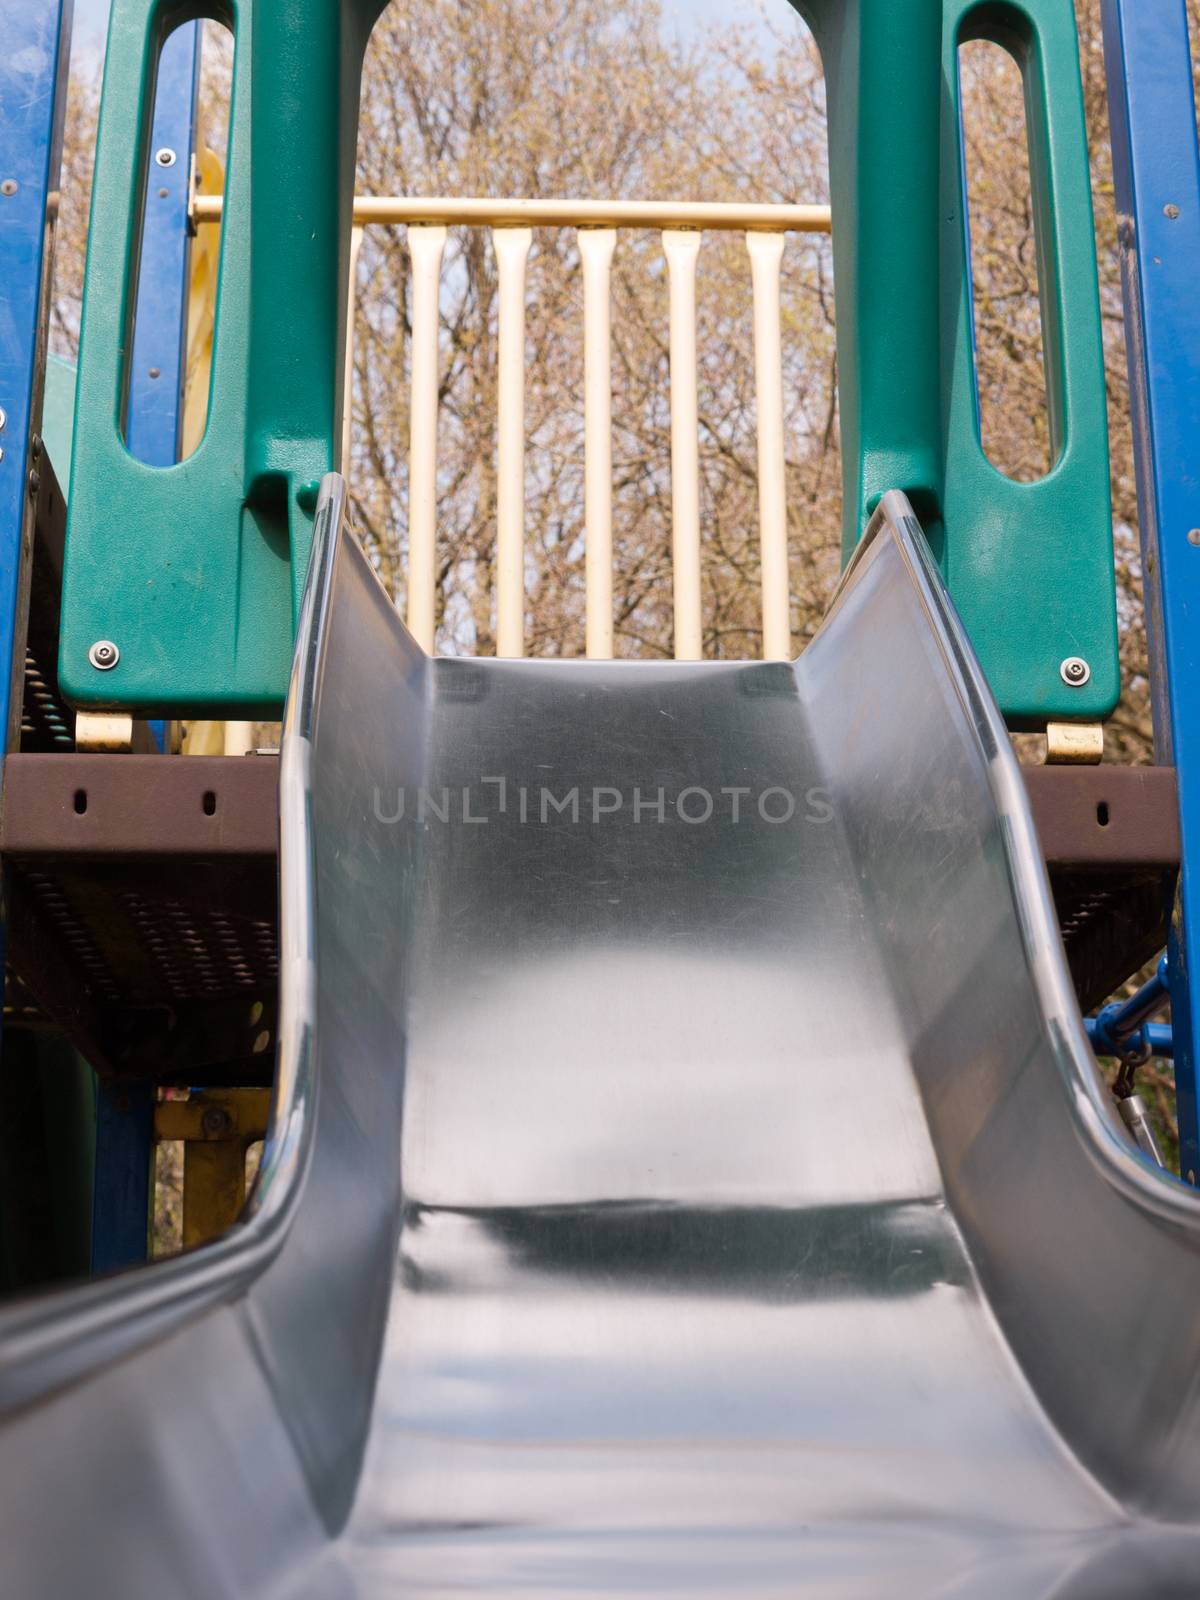 a close up shot of a metal slide in a child's playground with bark wooden chips for safety, accident, no people shining metal, dangerous and fun for children and parents in summer and spring